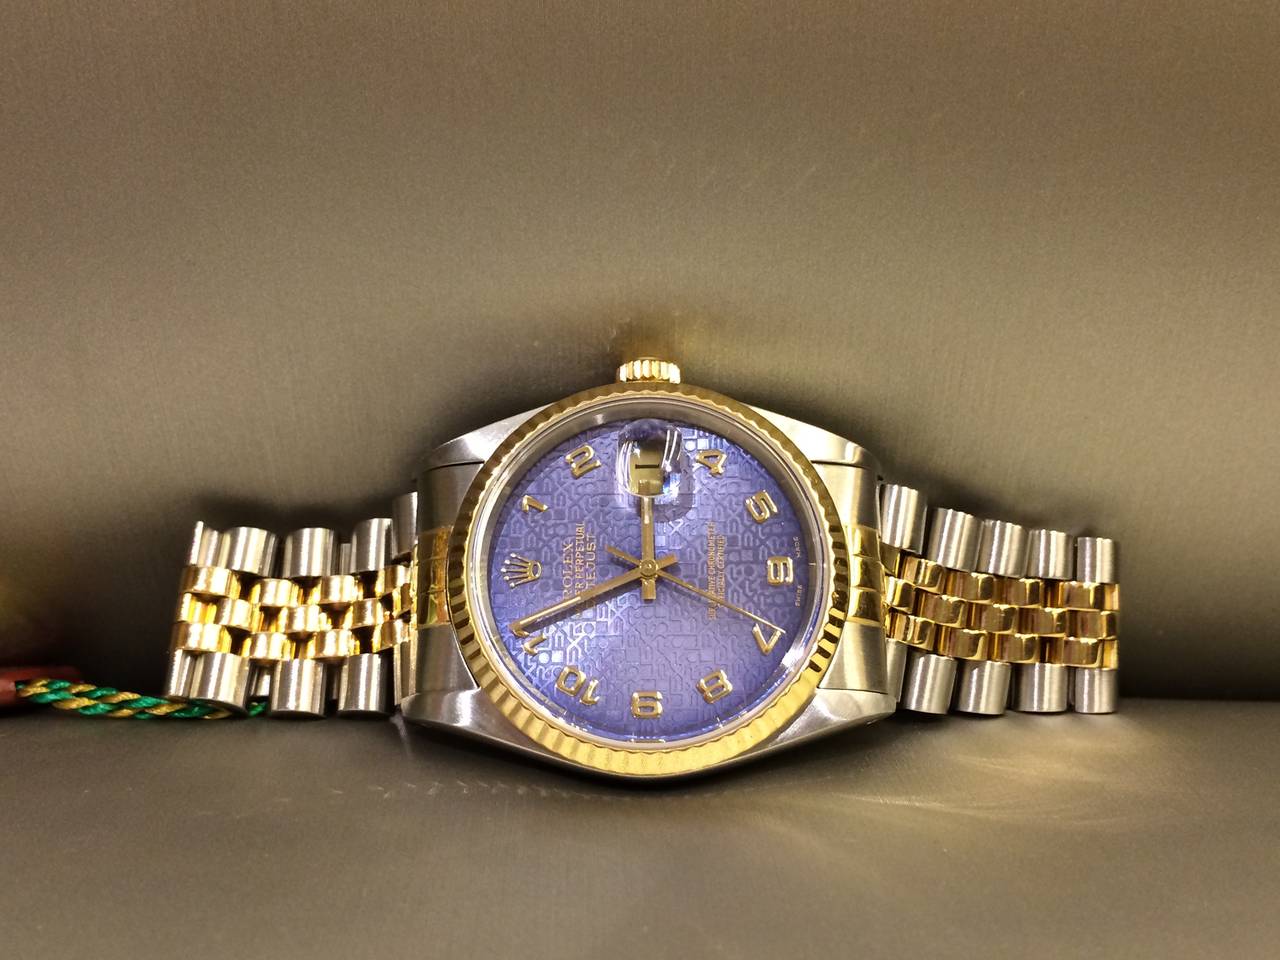 Rolex Datejust Wristwatch, Stainless Steel and 18kt Yellow Gold, 36mm, Jubilee, Blue Dial, Circa 1988, Model # 16233, Serial # R999182